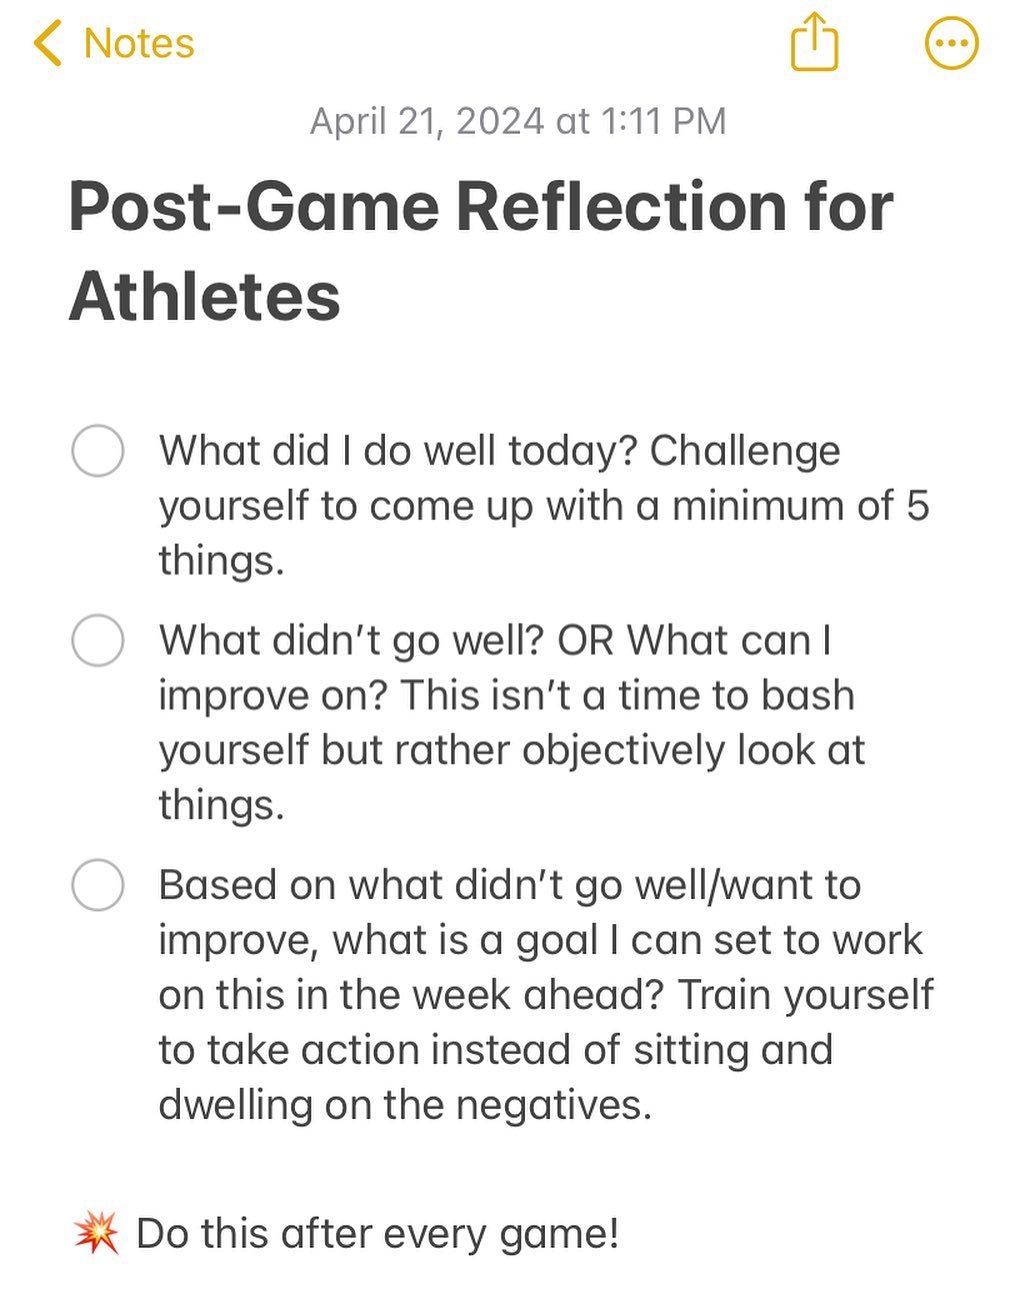 [SAVE THIS] Reflecting after games will be one of the best habits you can create for yourself as an athlete.

This reflection will allow you to:

1️⃣ Acknowledge and celebrate what you&rsquo;re doing well. Which in turn will reinforce those performan